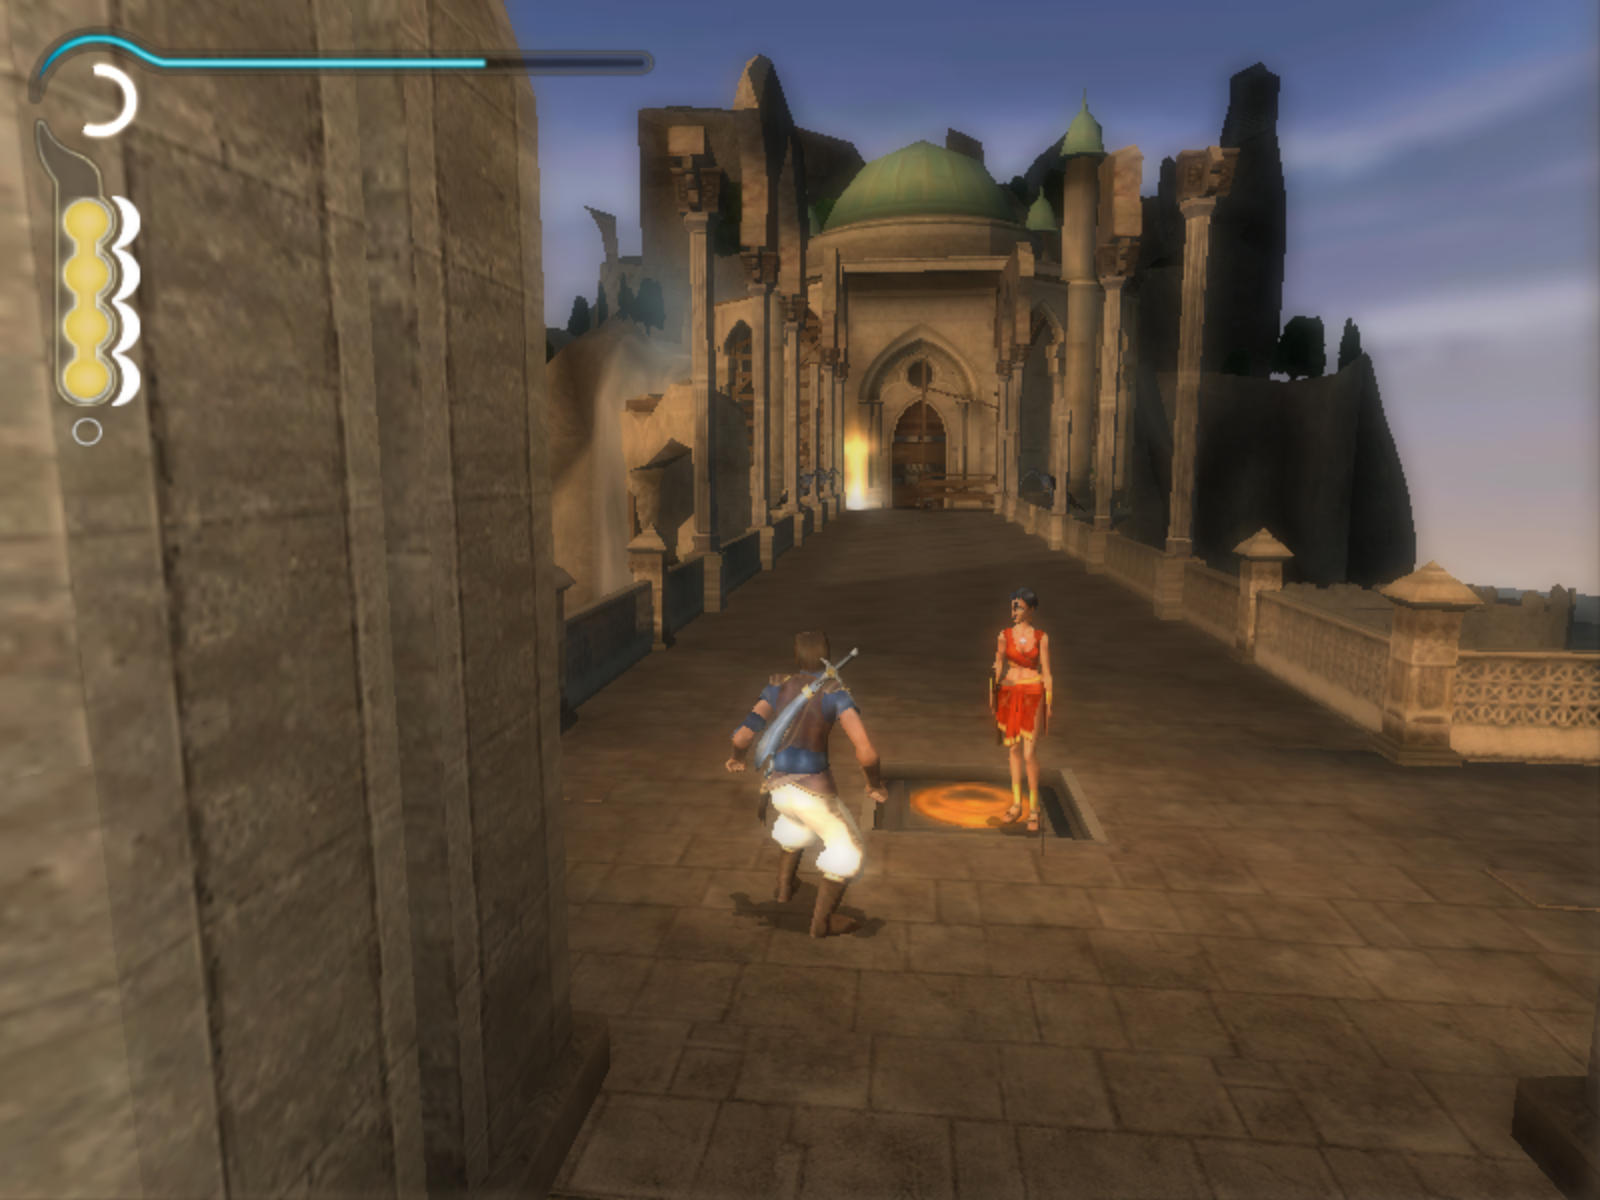 prince of persia the sands of time